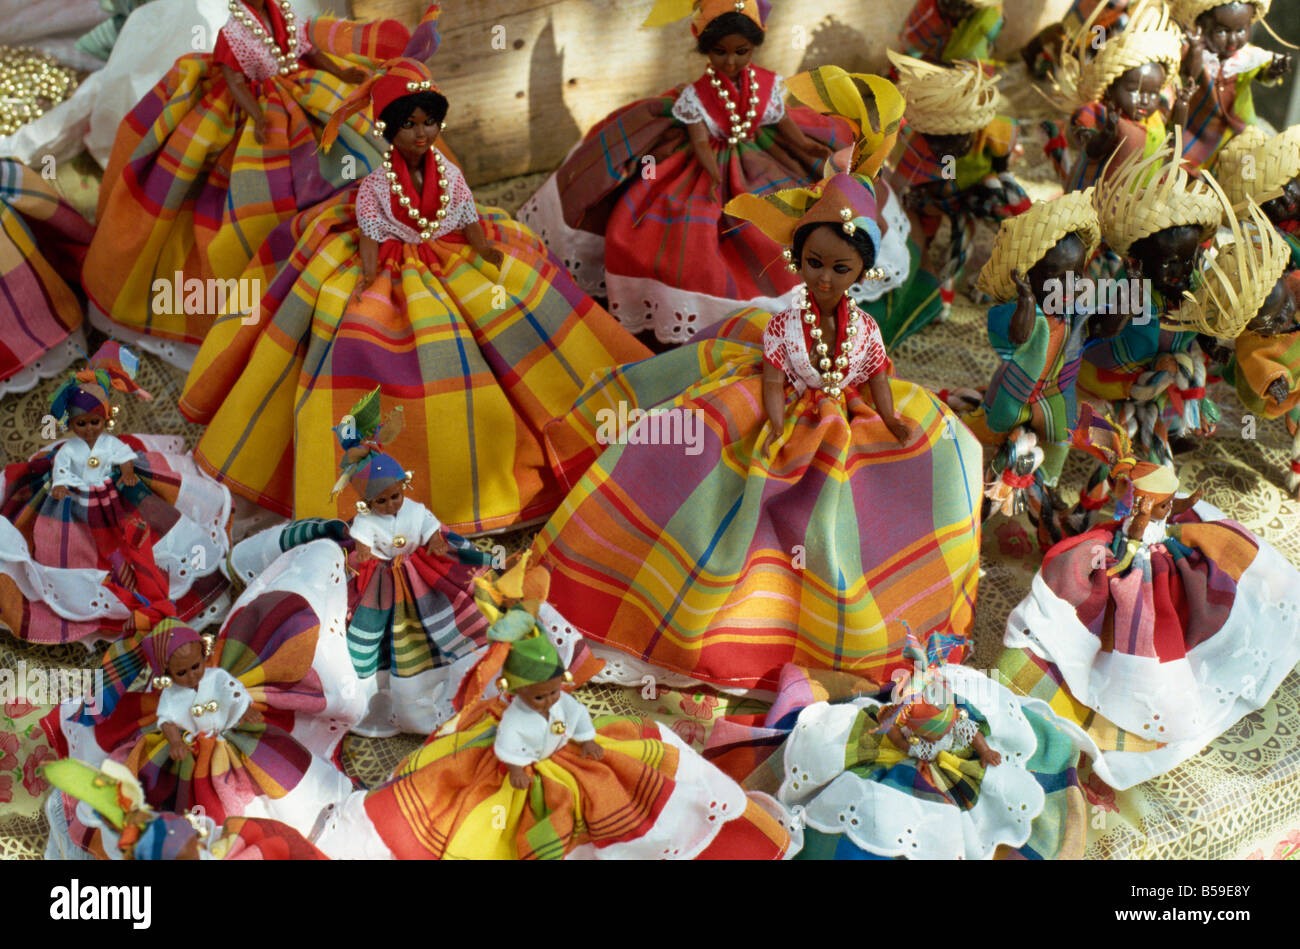 Dolls in Martinique dress, on display for sale, Fort de France, Martinique, Windward Islands, West Indies, Caribbean Stock Photo